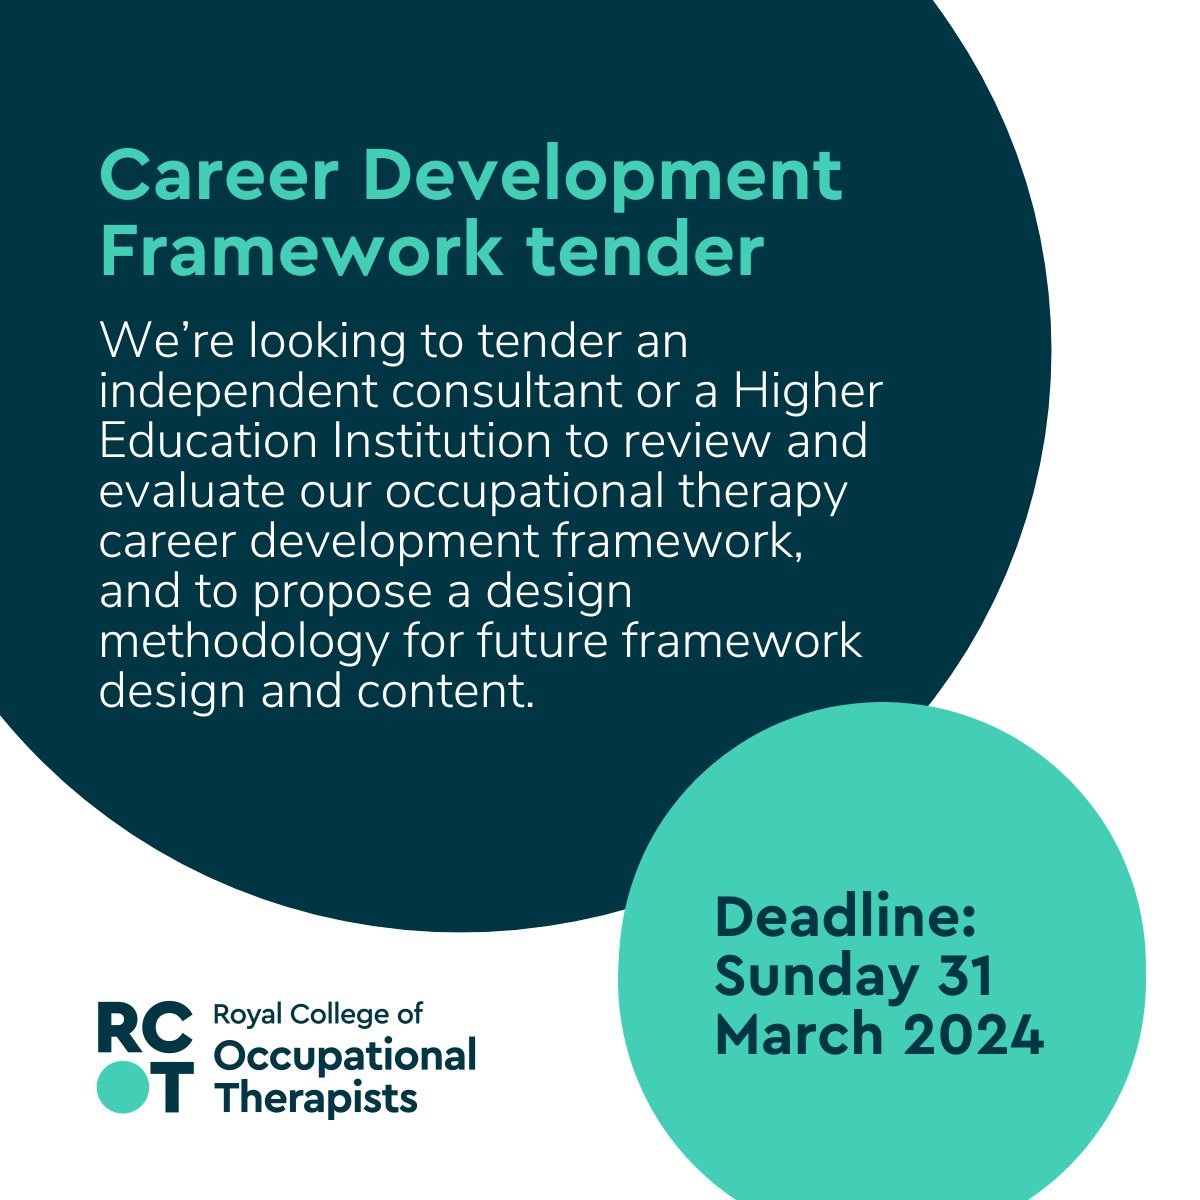 Are you keen on reimagining the possibilities for the career development framework in occupational therapy? We're looking for independent consultants or Higher Education Institutions to submit a proposal for our Career Development Framework tender: loom.ly/K9HwyW4